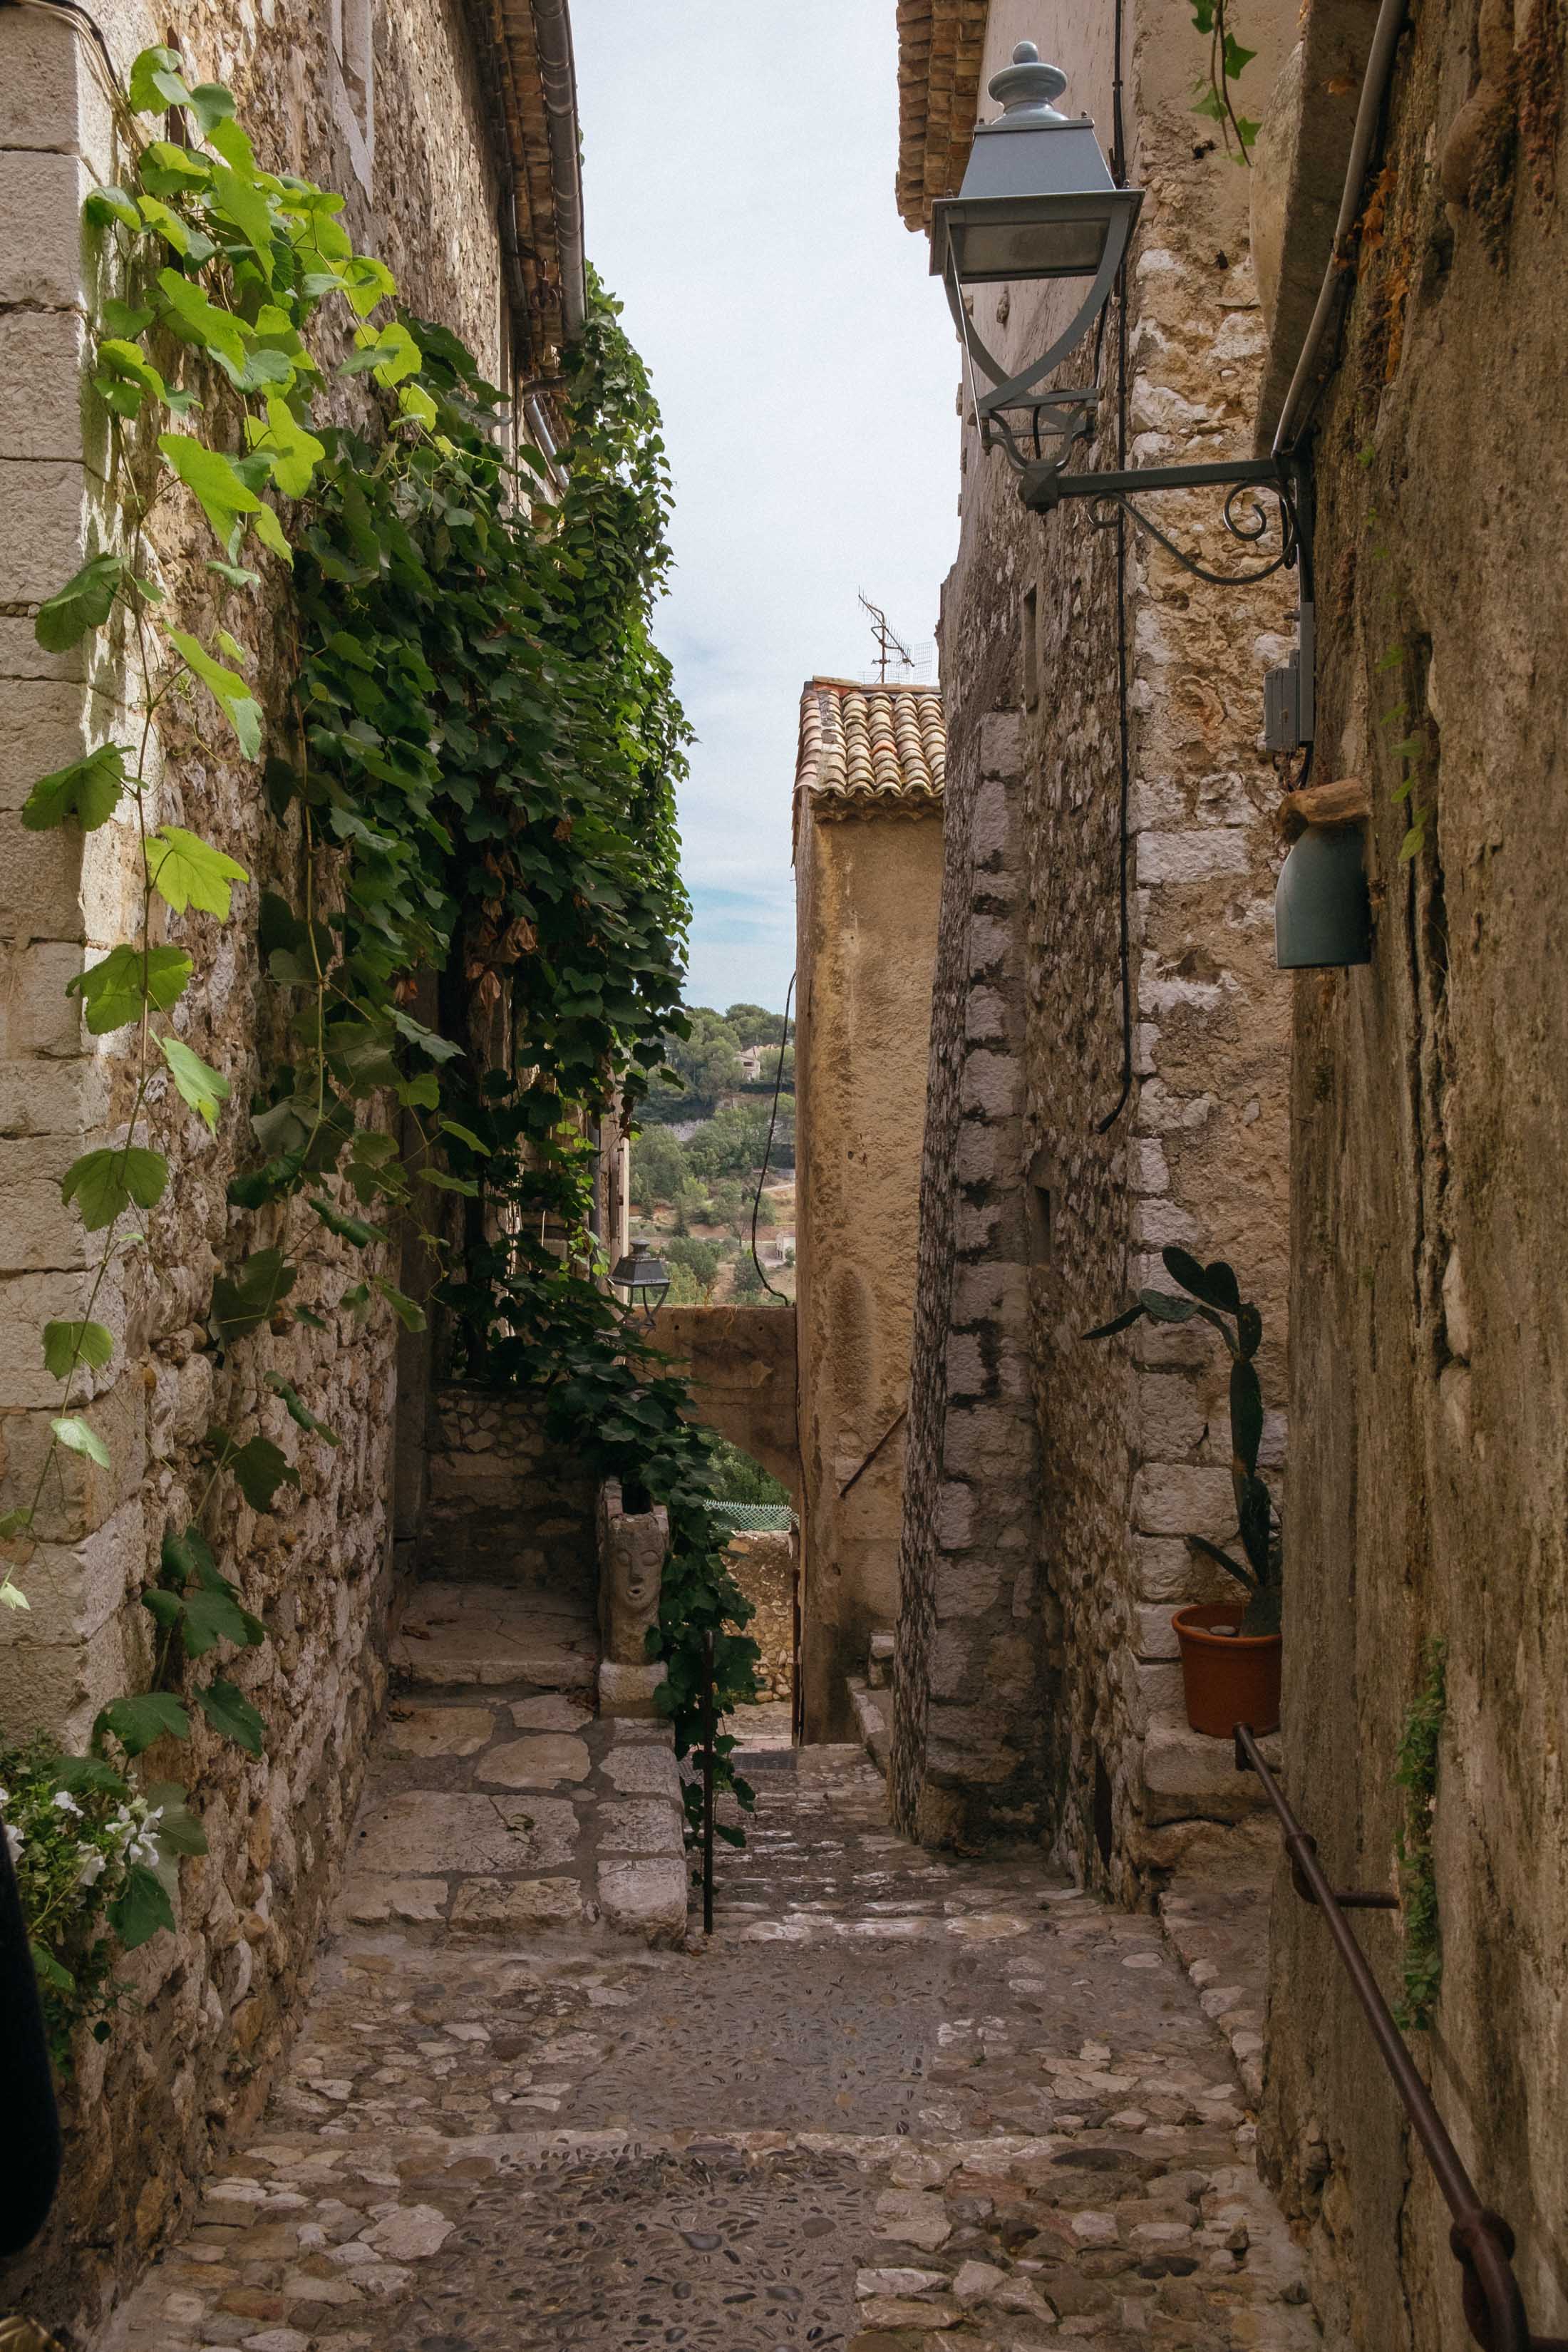 The view from the top in Saint Paul de Vence